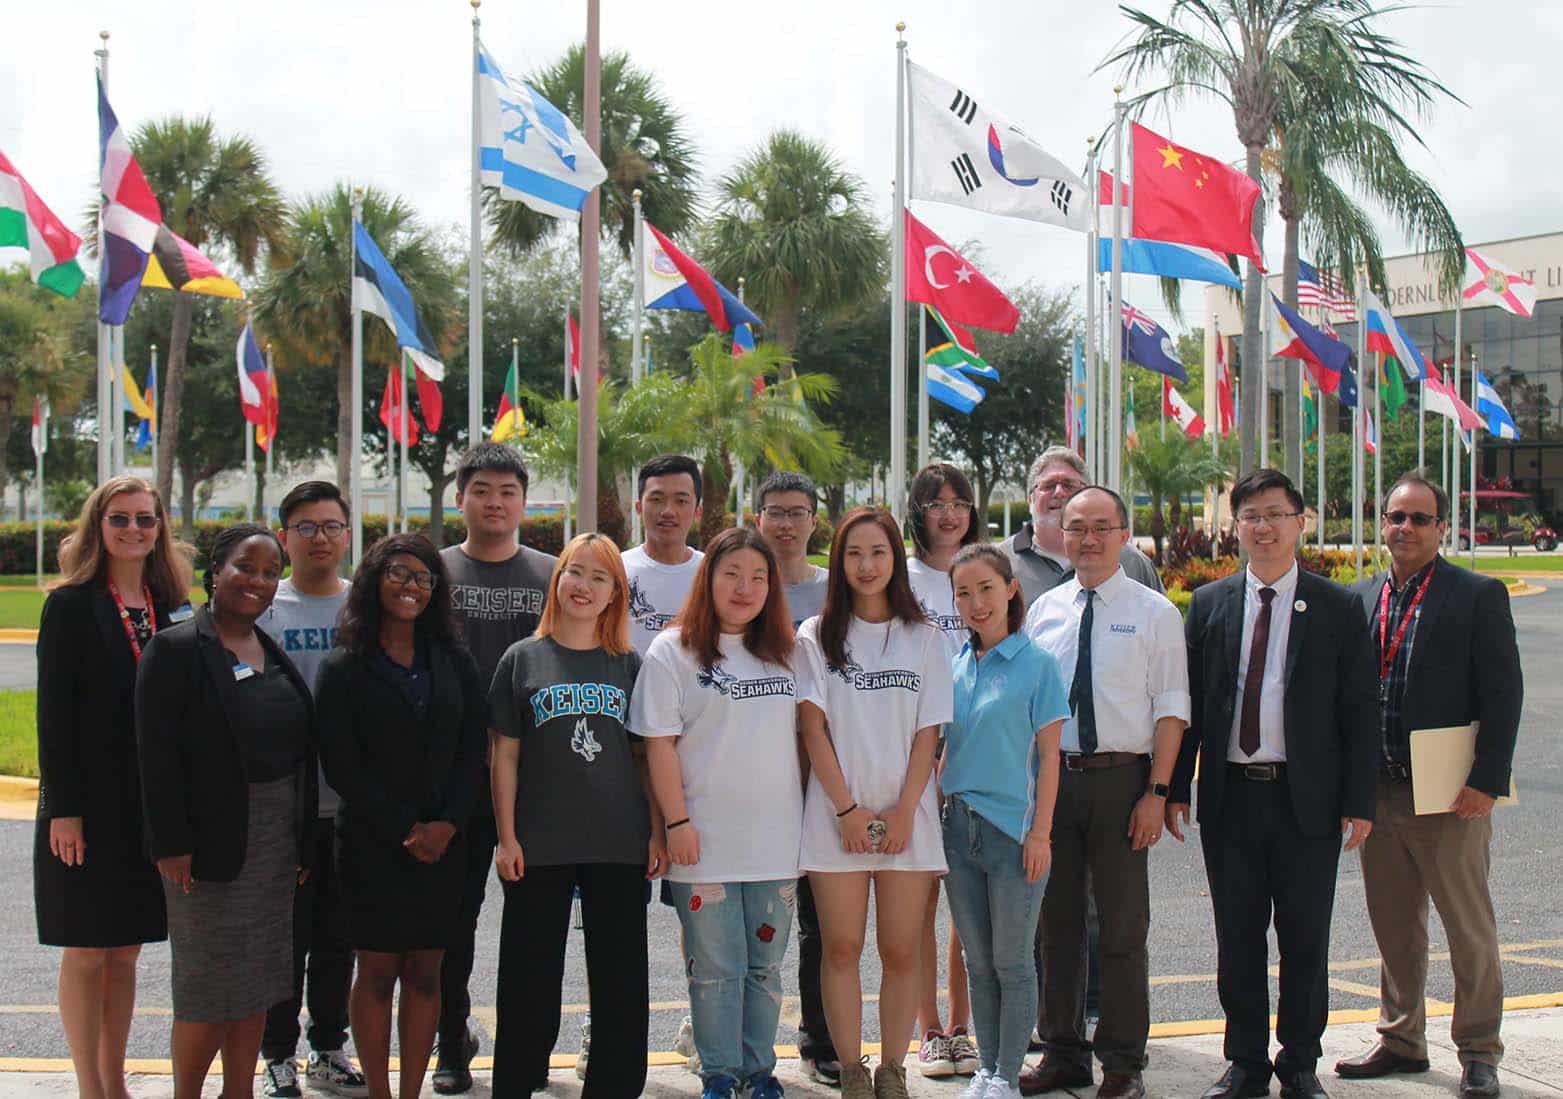 Keiser University Welcomes Shanghai Campus Students to the United States